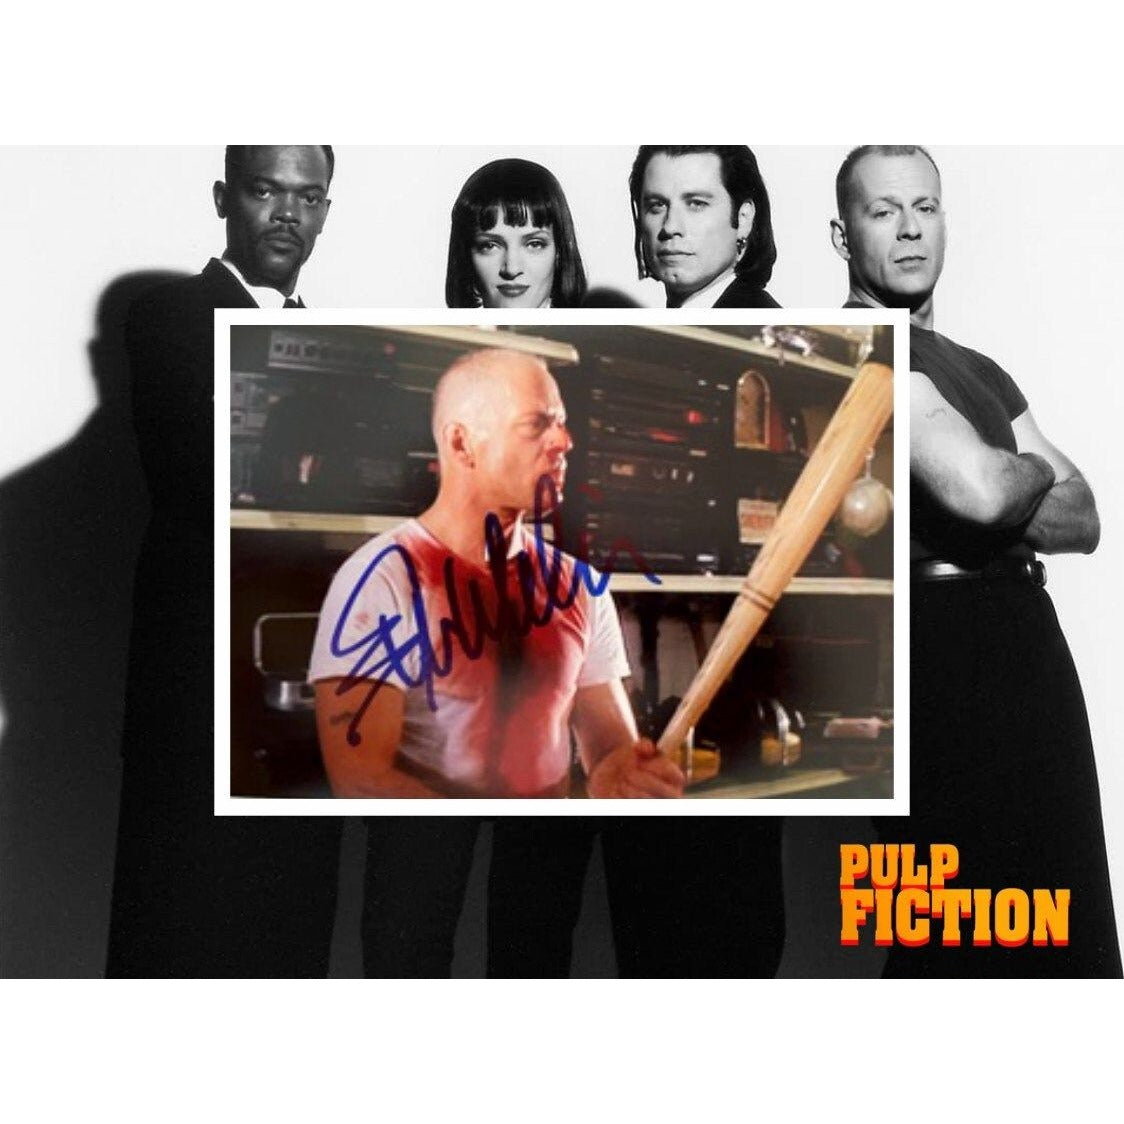 Bruce Willis "Butch Coolidge" Pulp Fiction 5 x 7 photo sign with proof